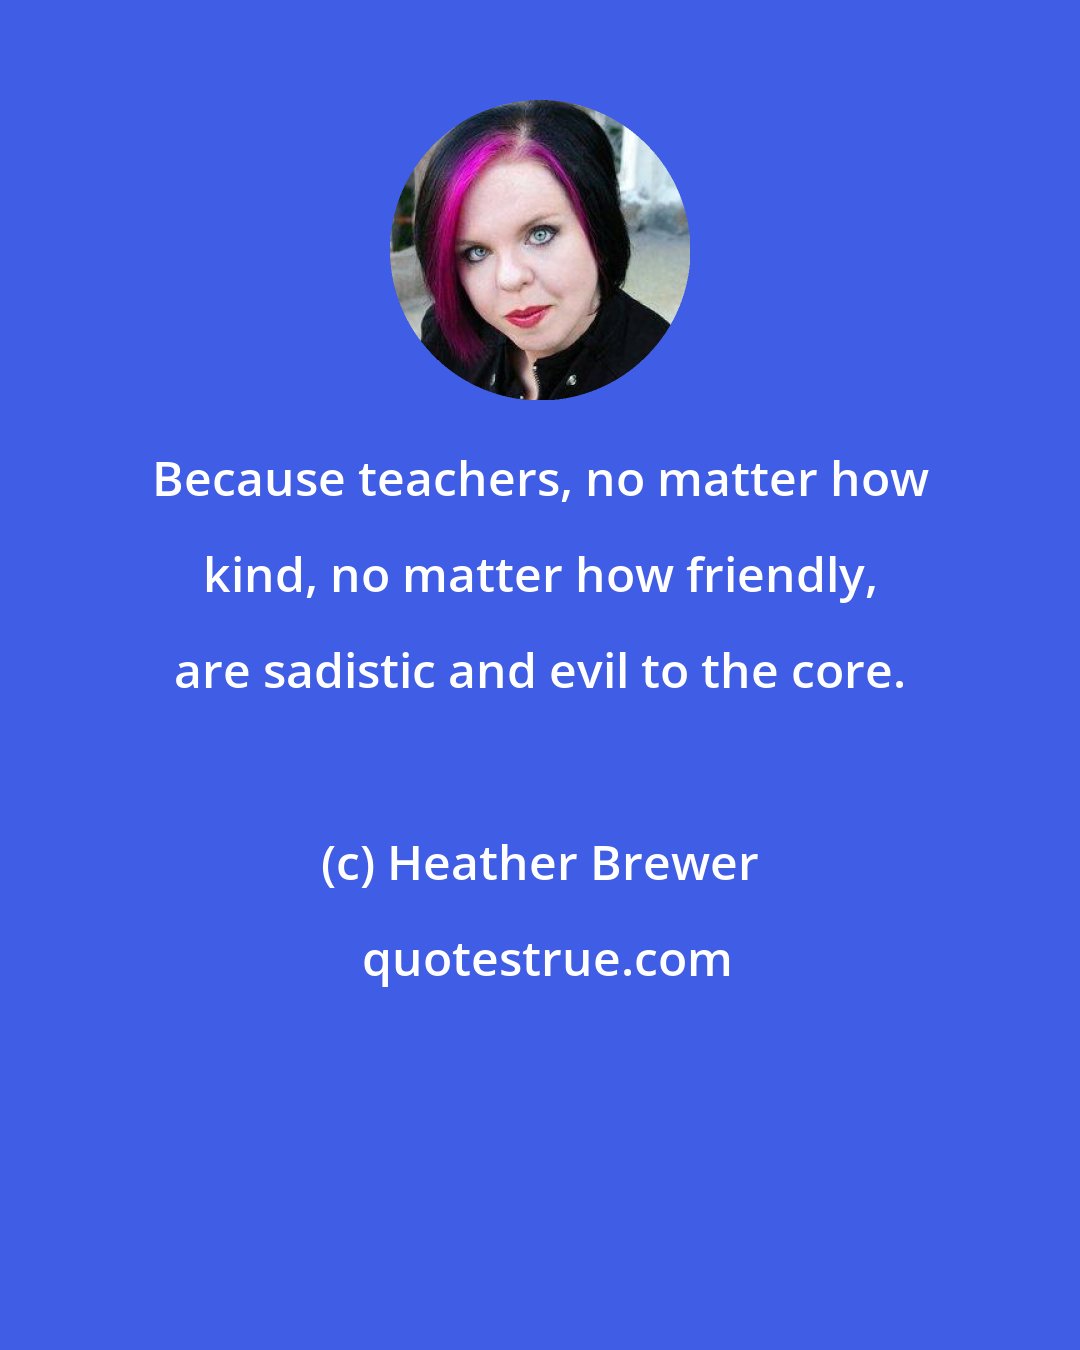 Heather Brewer: Because teachers, no matter how kind, no matter how friendly, are sadistic and evil to the core.